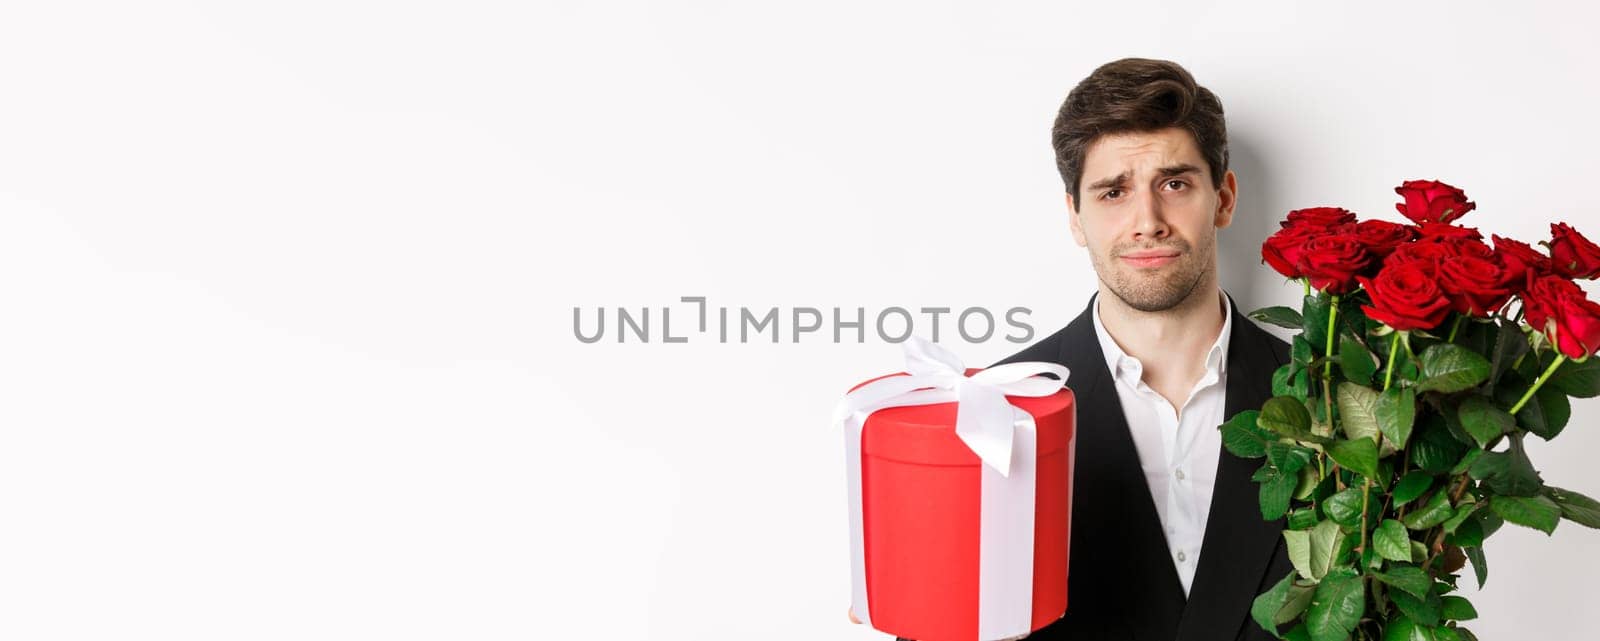 Close-up of sad man in suit, holding bouquet of red roses and a gift, standing upset against white background.